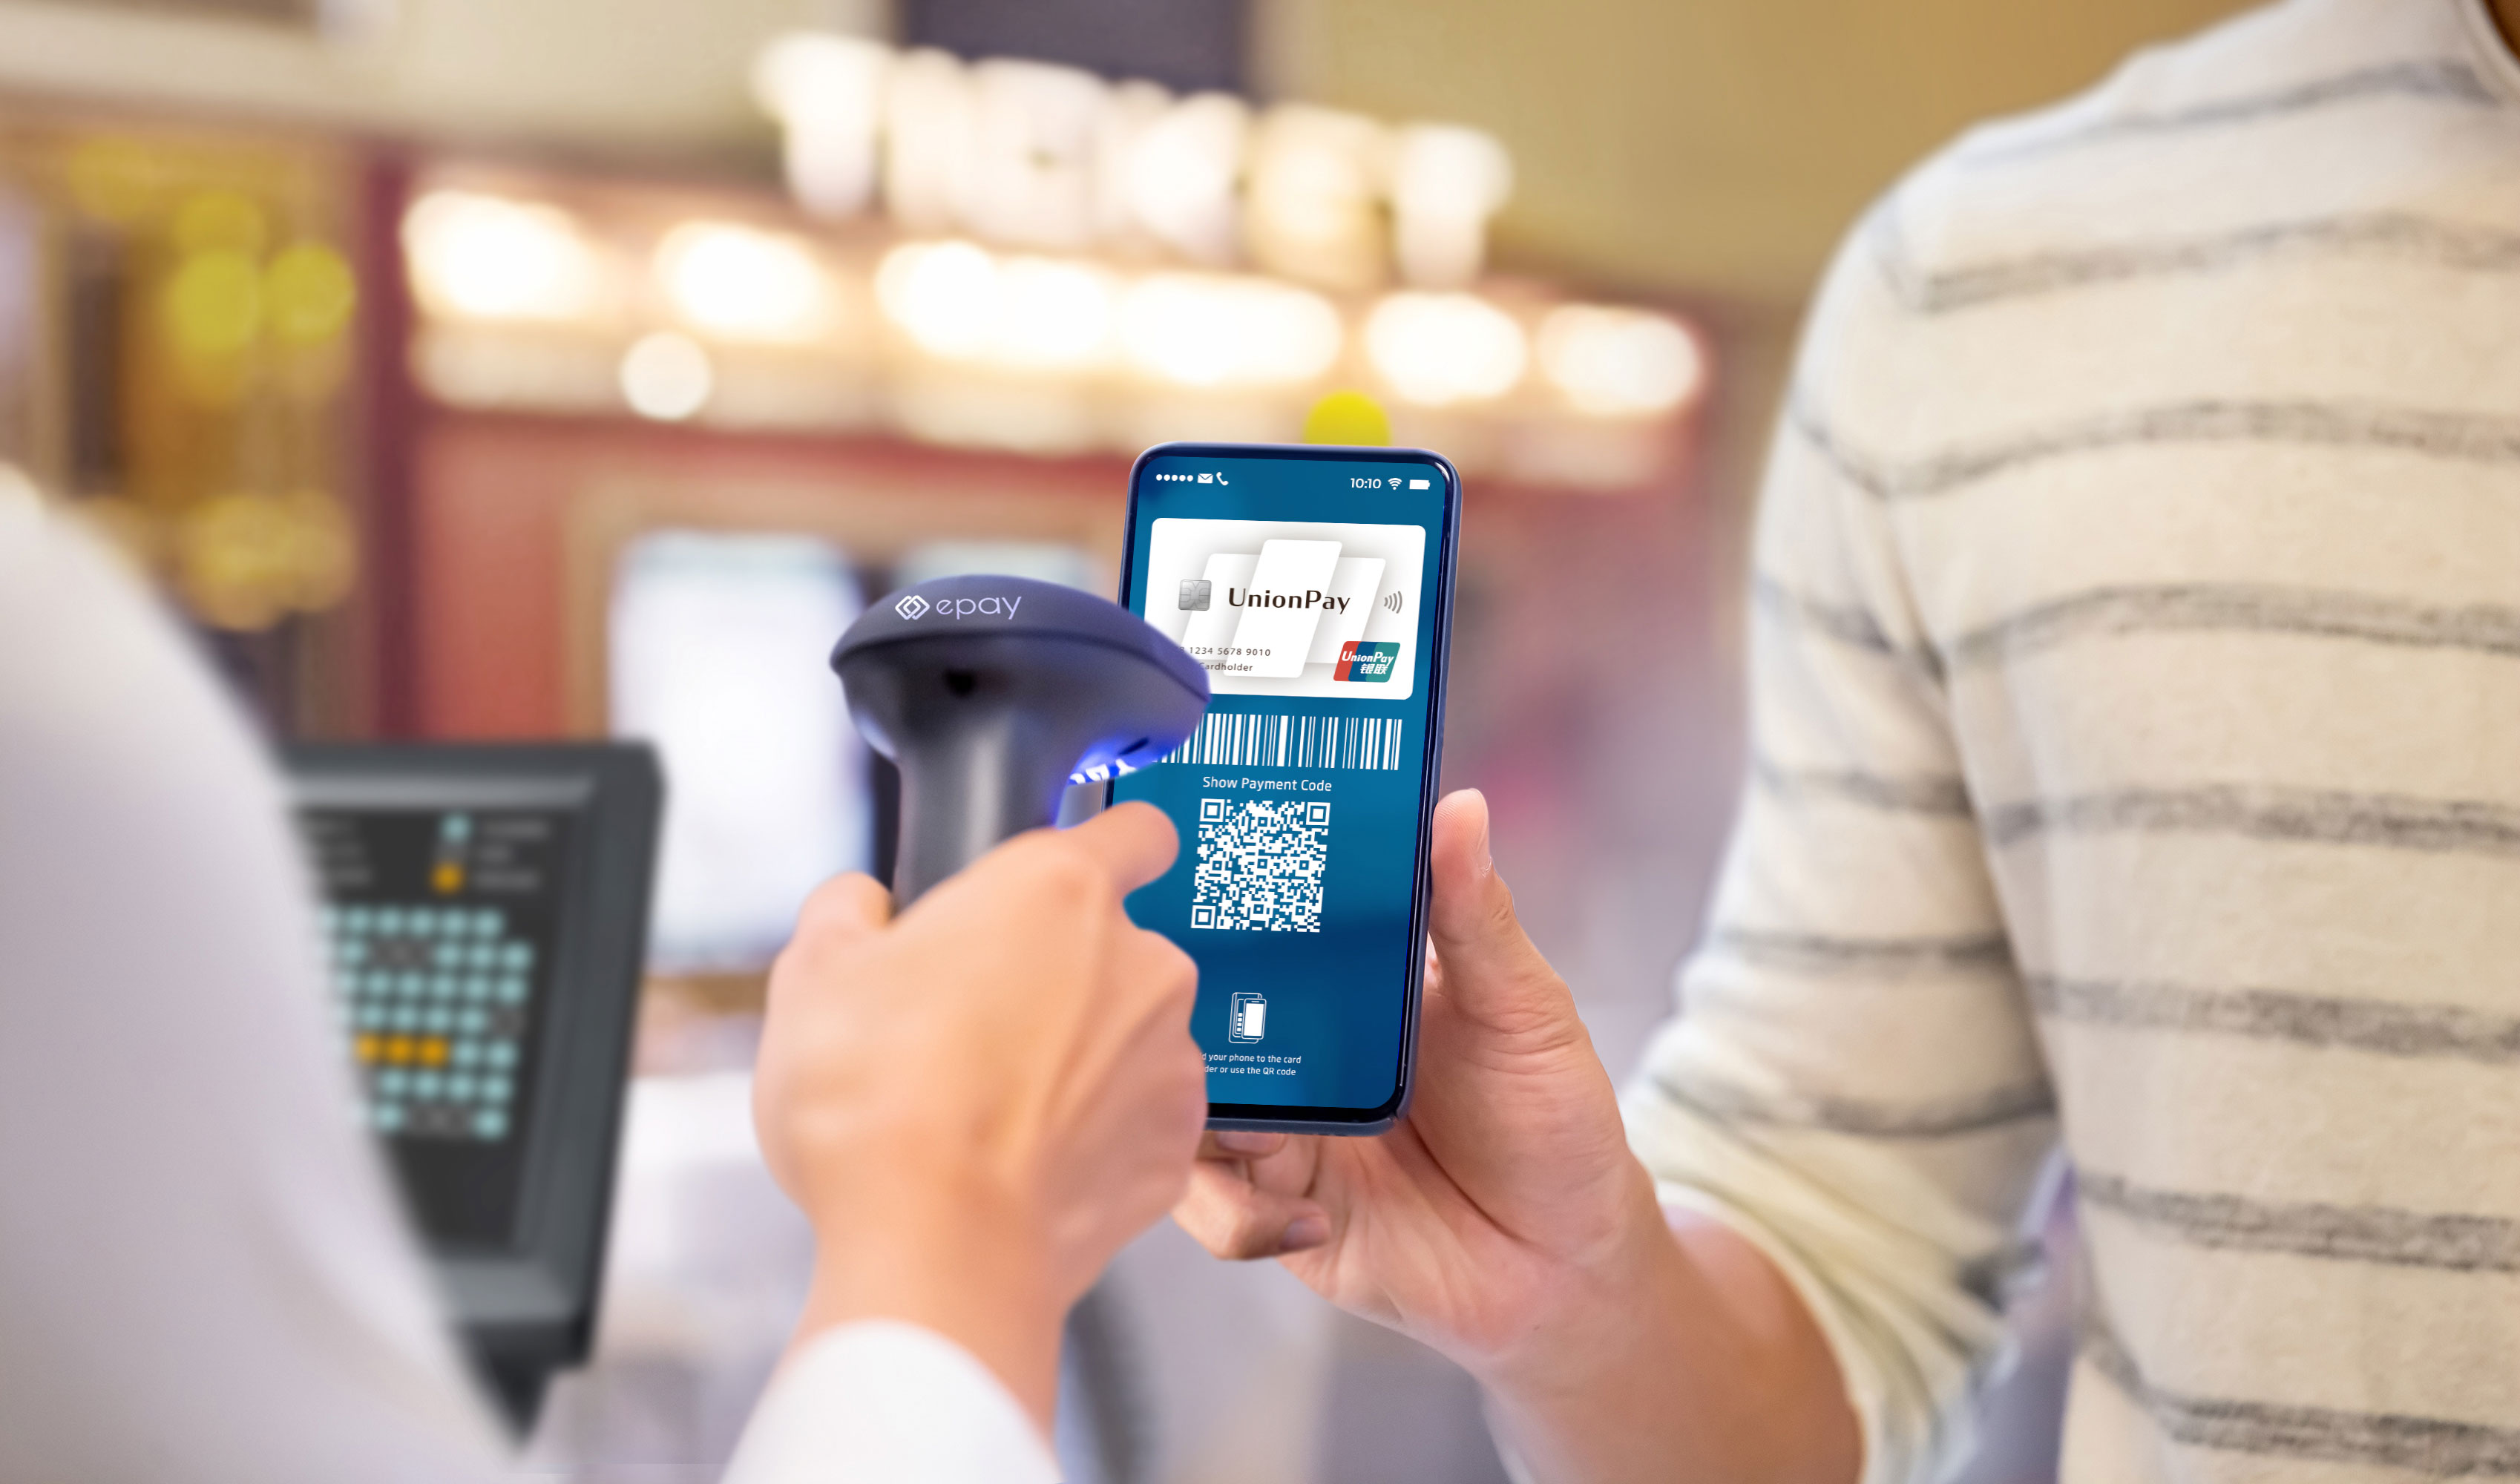 This image shows how a customer can pay with a QR code in the UnionPay App at an epay point of sale in a retail store.